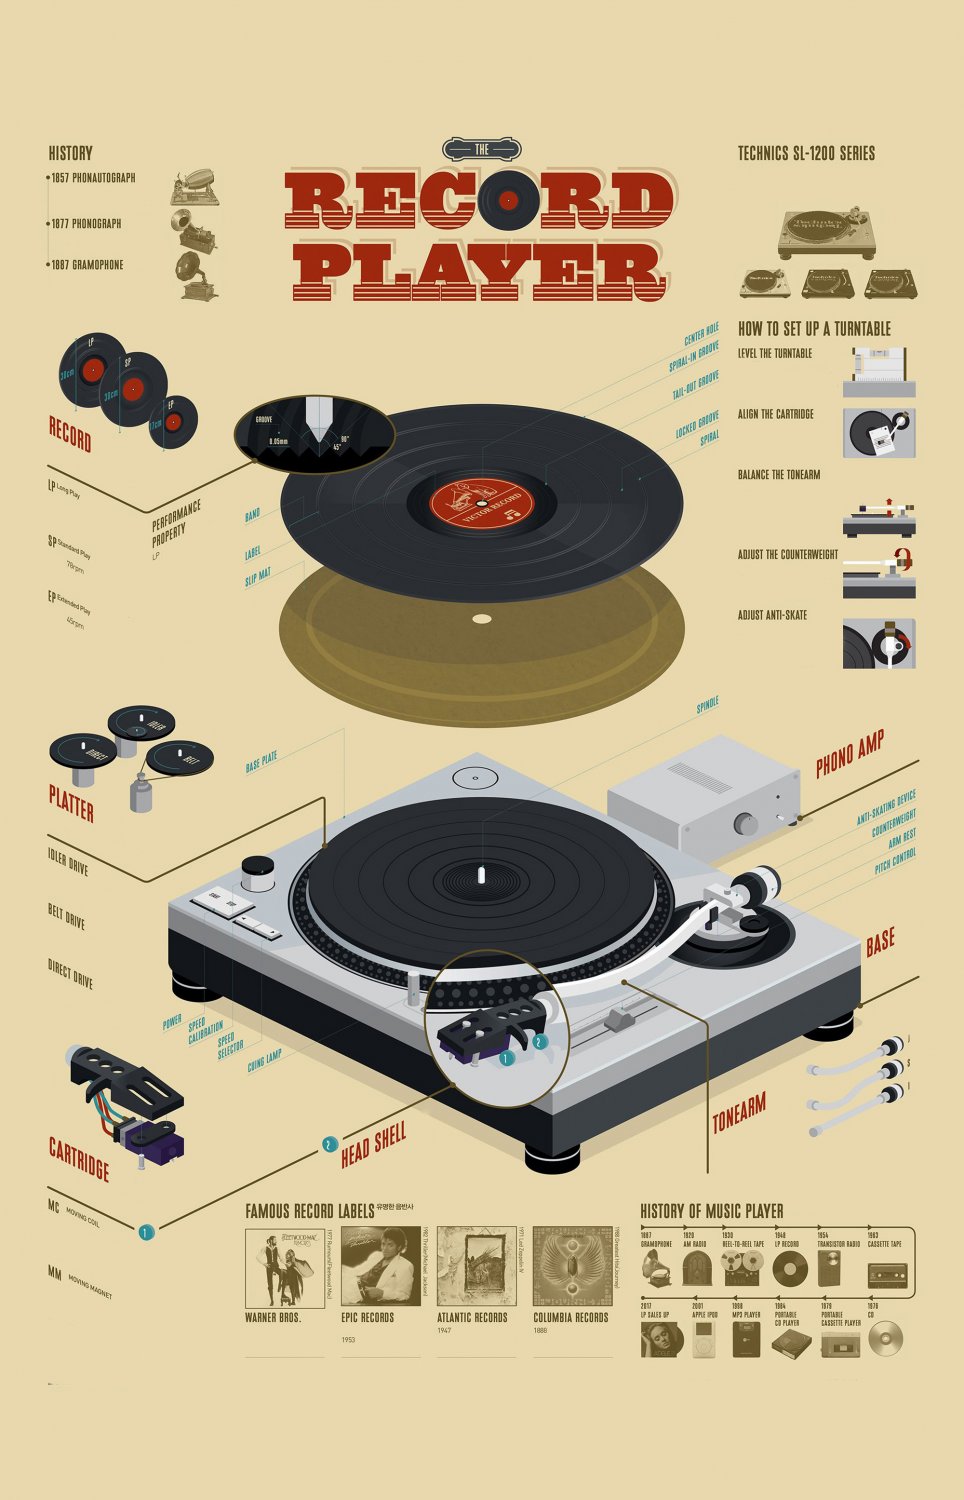 The Record Player Infographic Chart 13"x19" (32cm/49cm) Polyester Fabric Poster